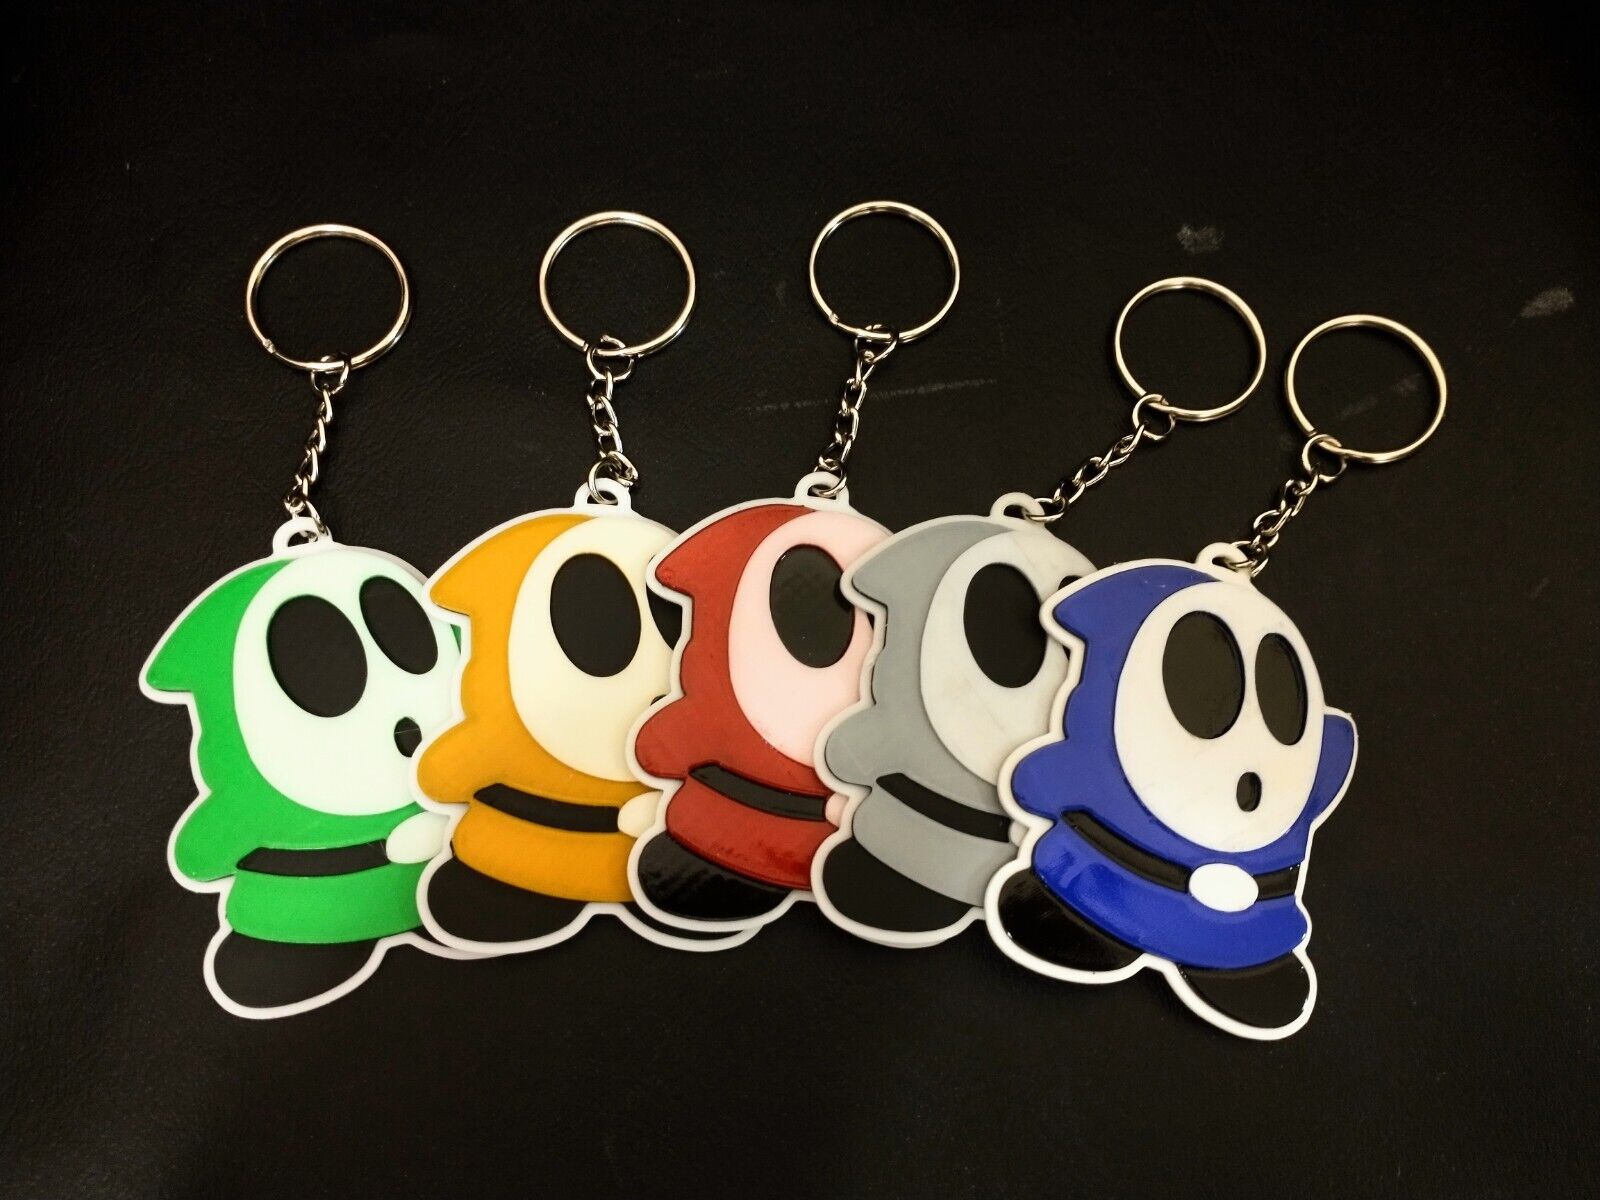 Shy Guy Ghost Keychain from Nintendo Super Mario Games in Multiple Colors